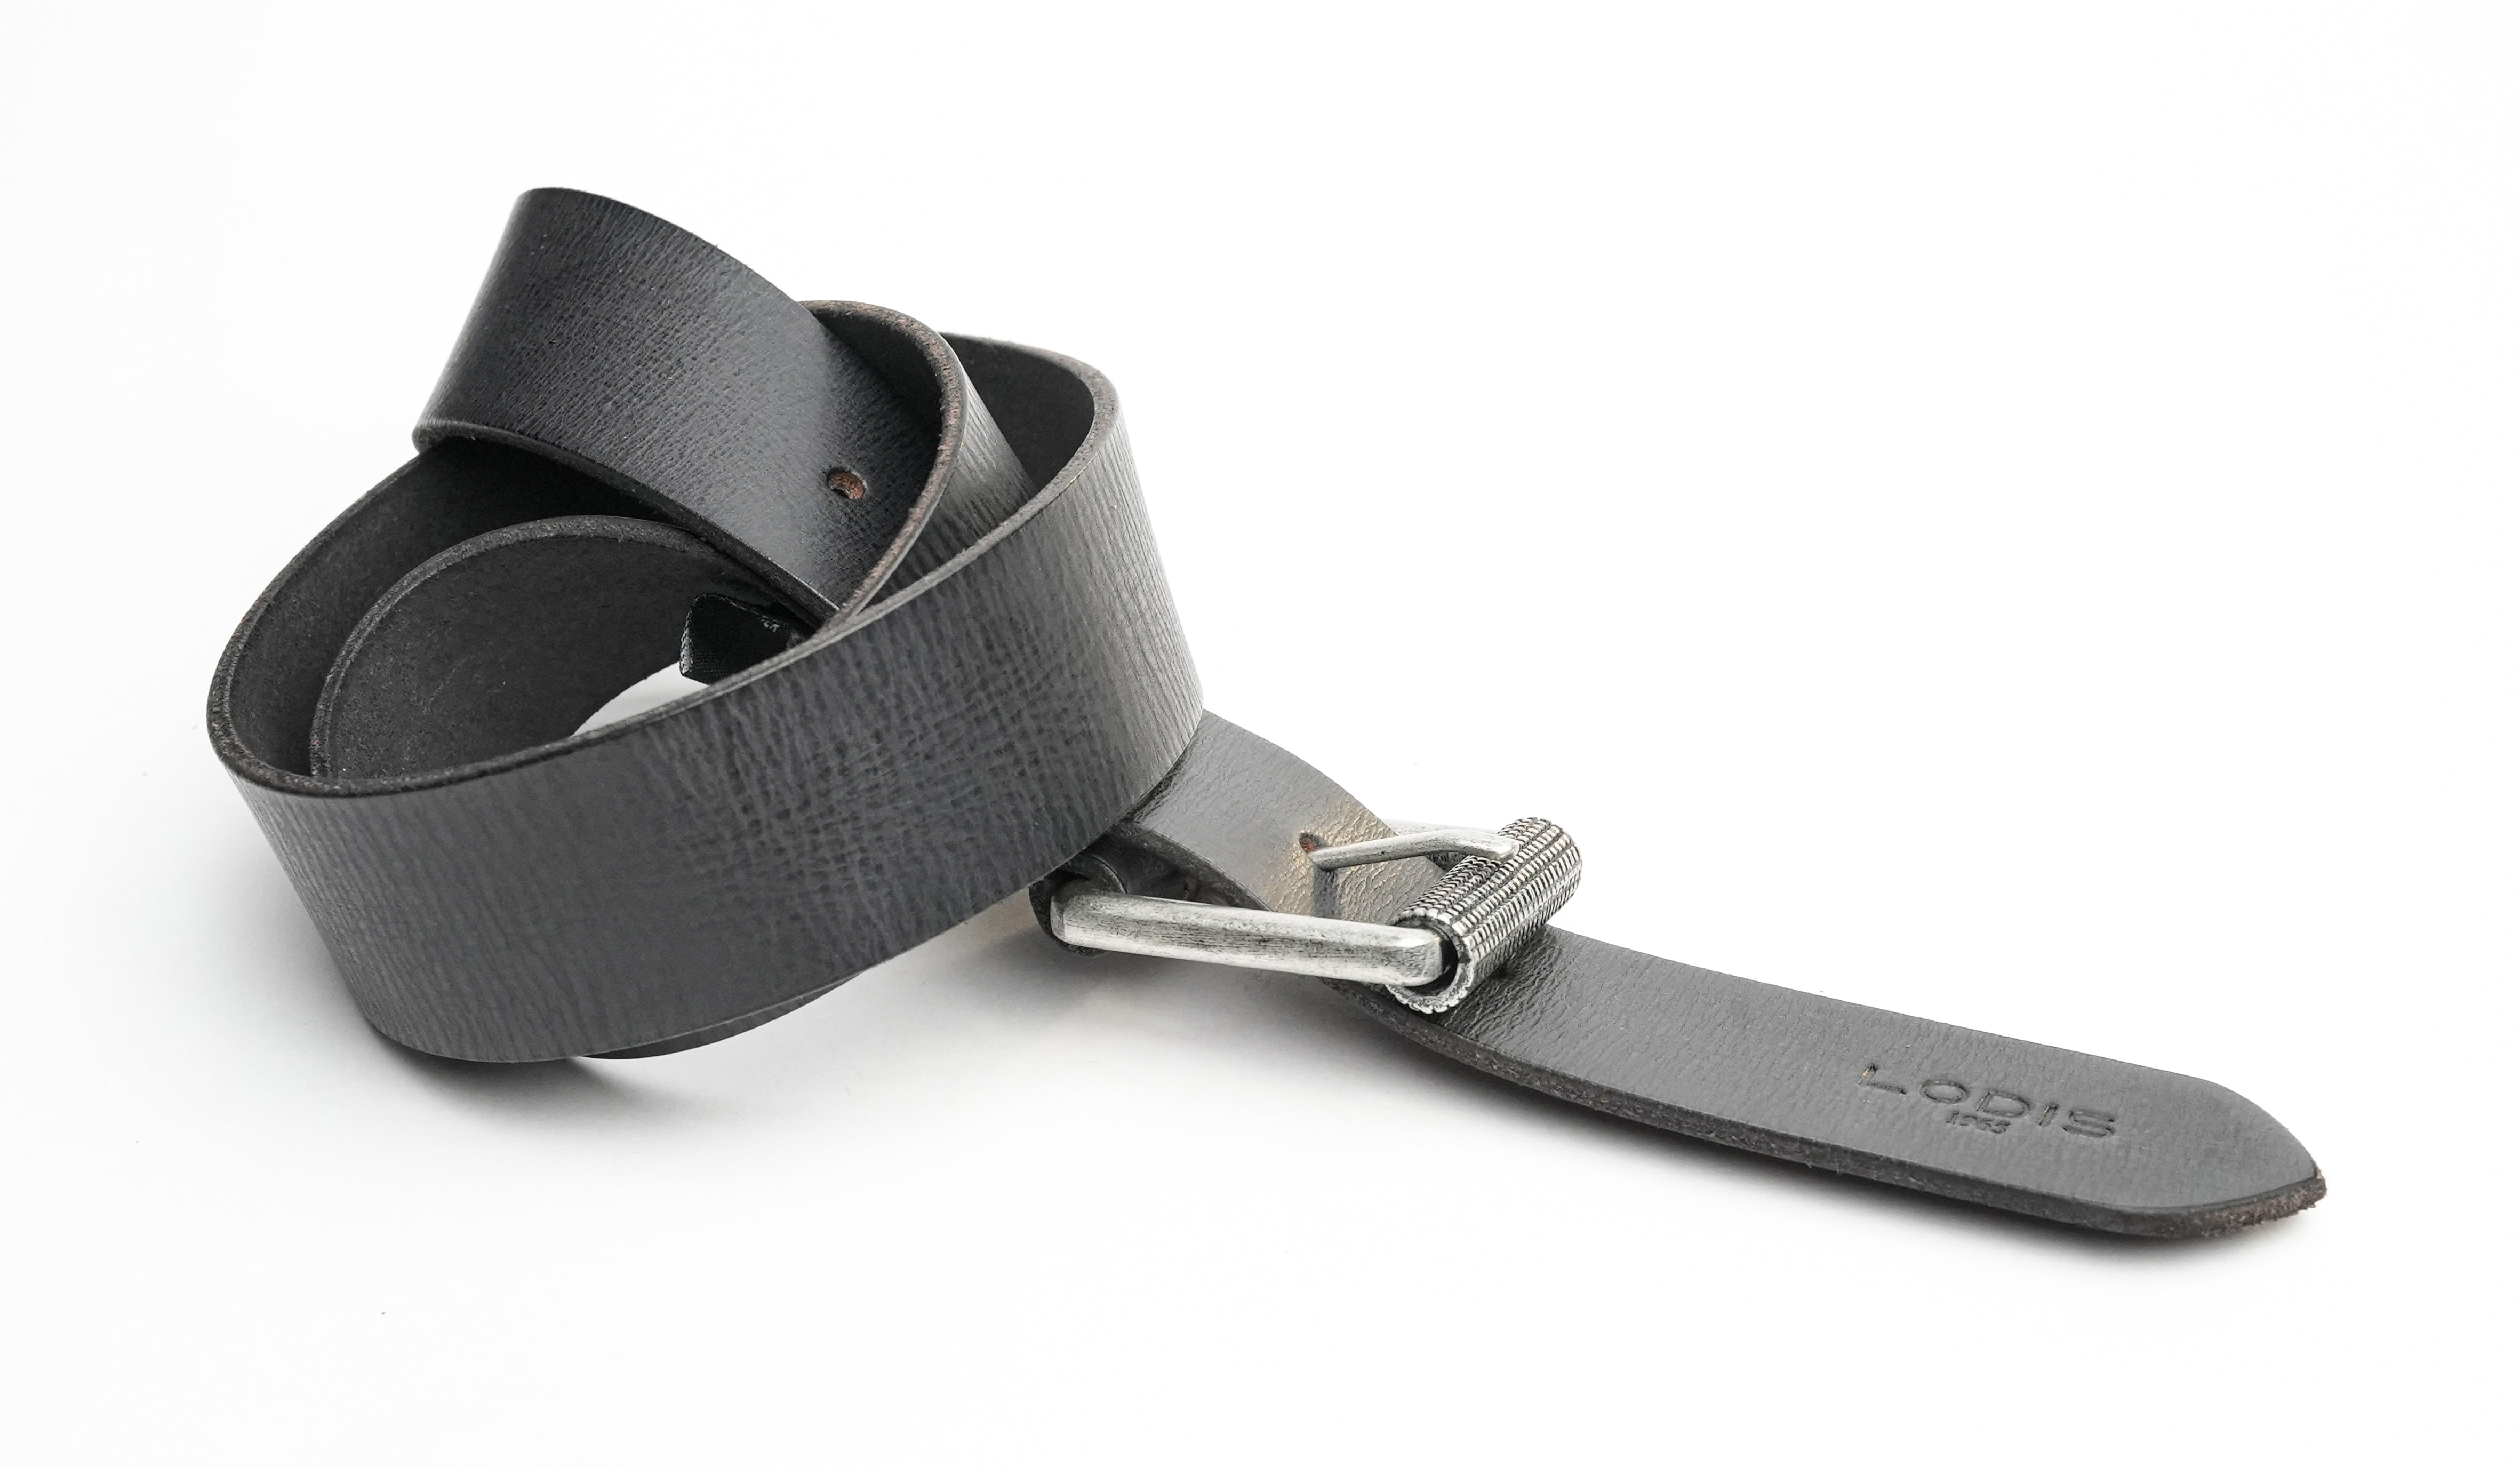 Buy Now and Upgrade Your Style by wearing Top Grain Leather Belt | Lodis